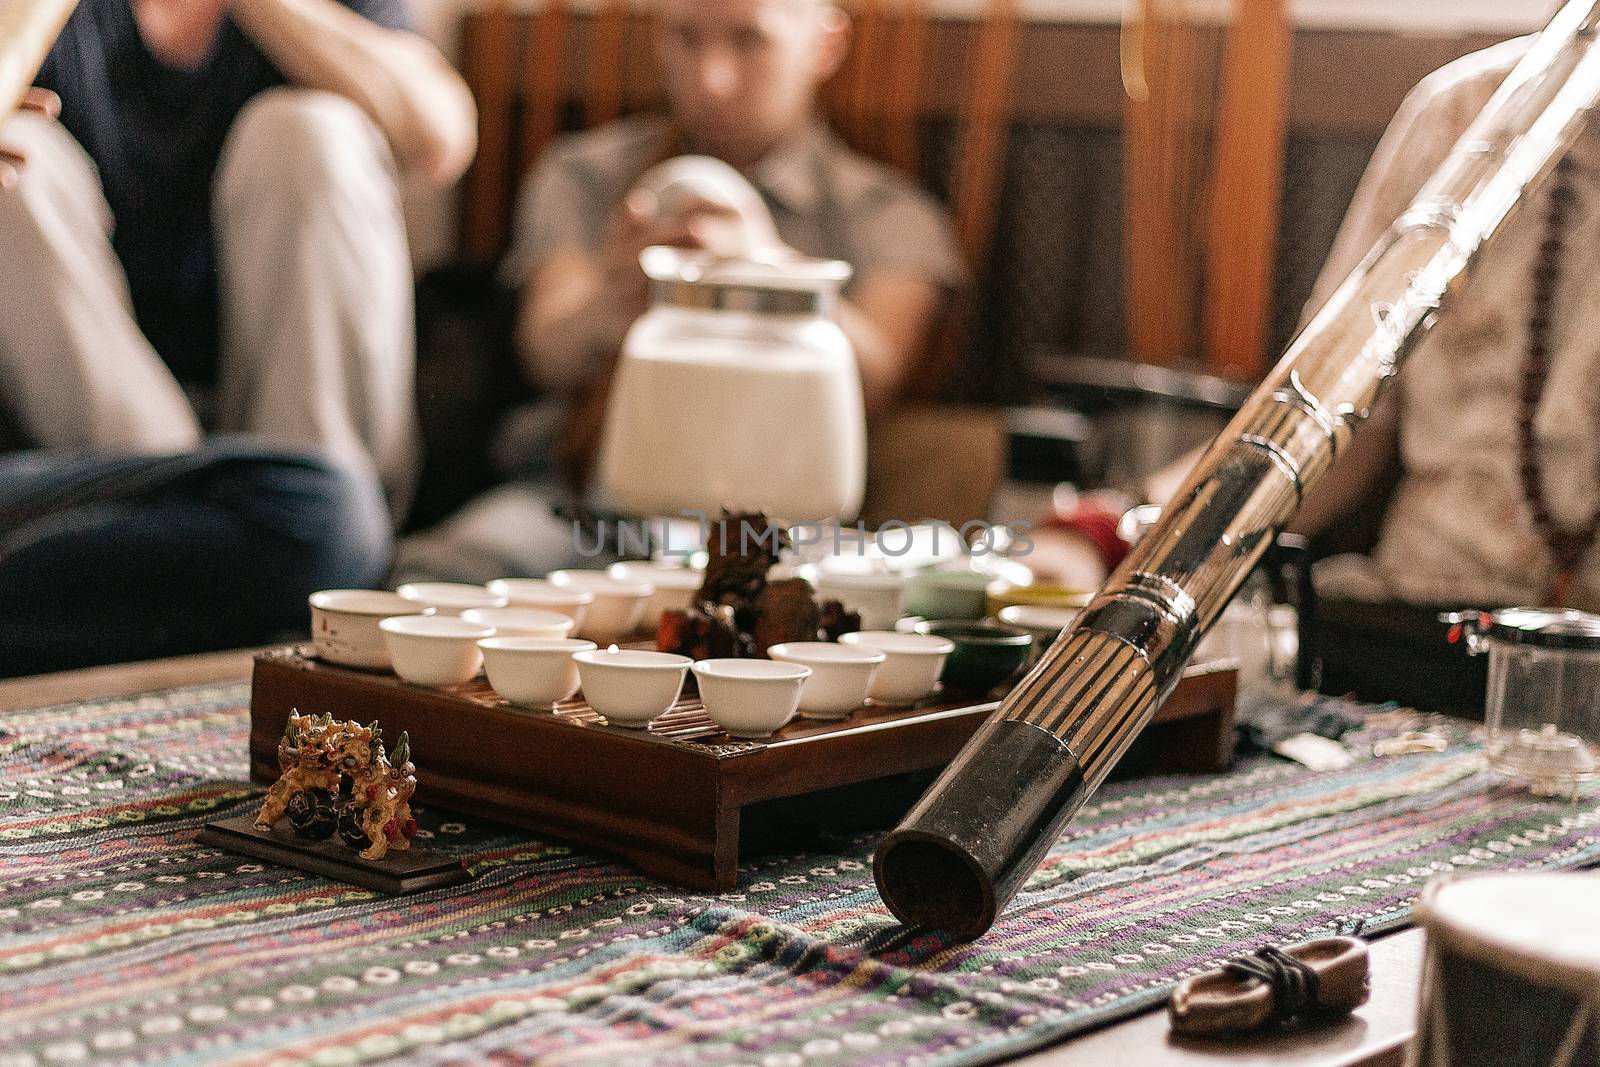 the tea ceremony is conducted by a tea master. tea party in the style of boho, hippie. tea cups on a special wooden coffee table. Preparation of masala tea. a didgeridoo. Tea is prepared on the fire.